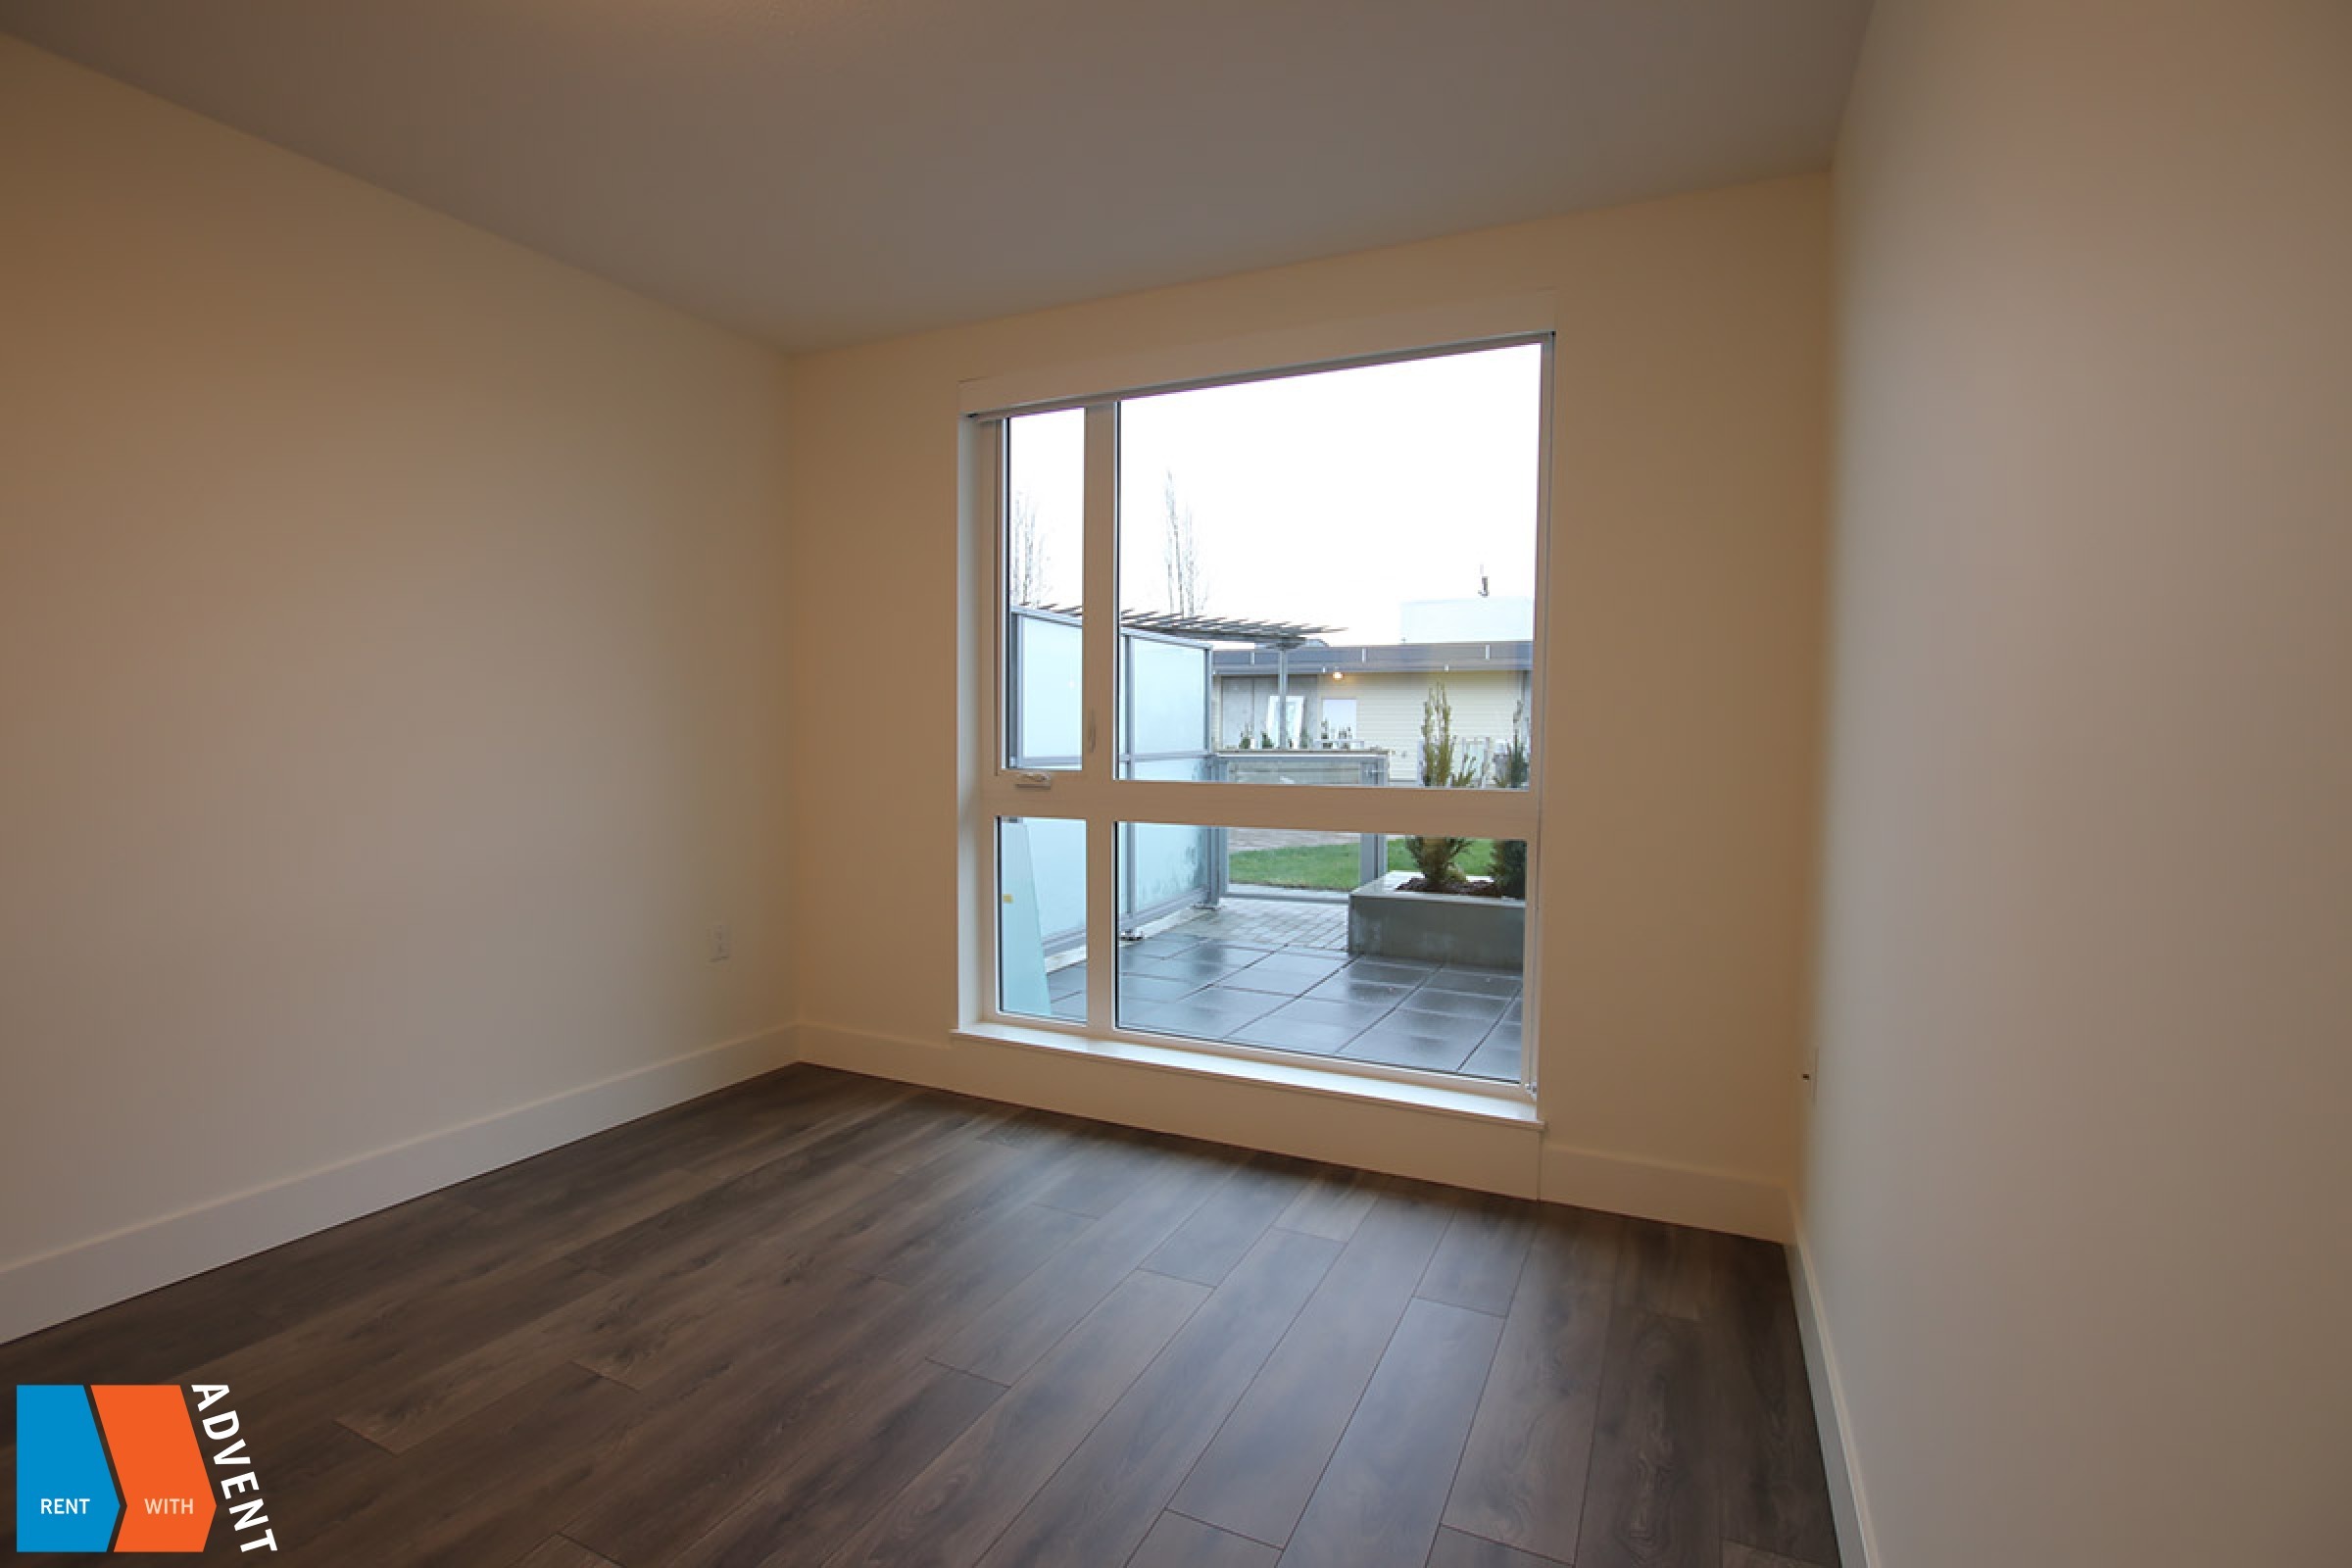 Modern 3rd Floor 2 Bedroom Apartment Rental at 2 Town Centre in Champlain Heights, Vancouver. 316 - 8580 River District Crossing, Vancouver, BC, Canada.